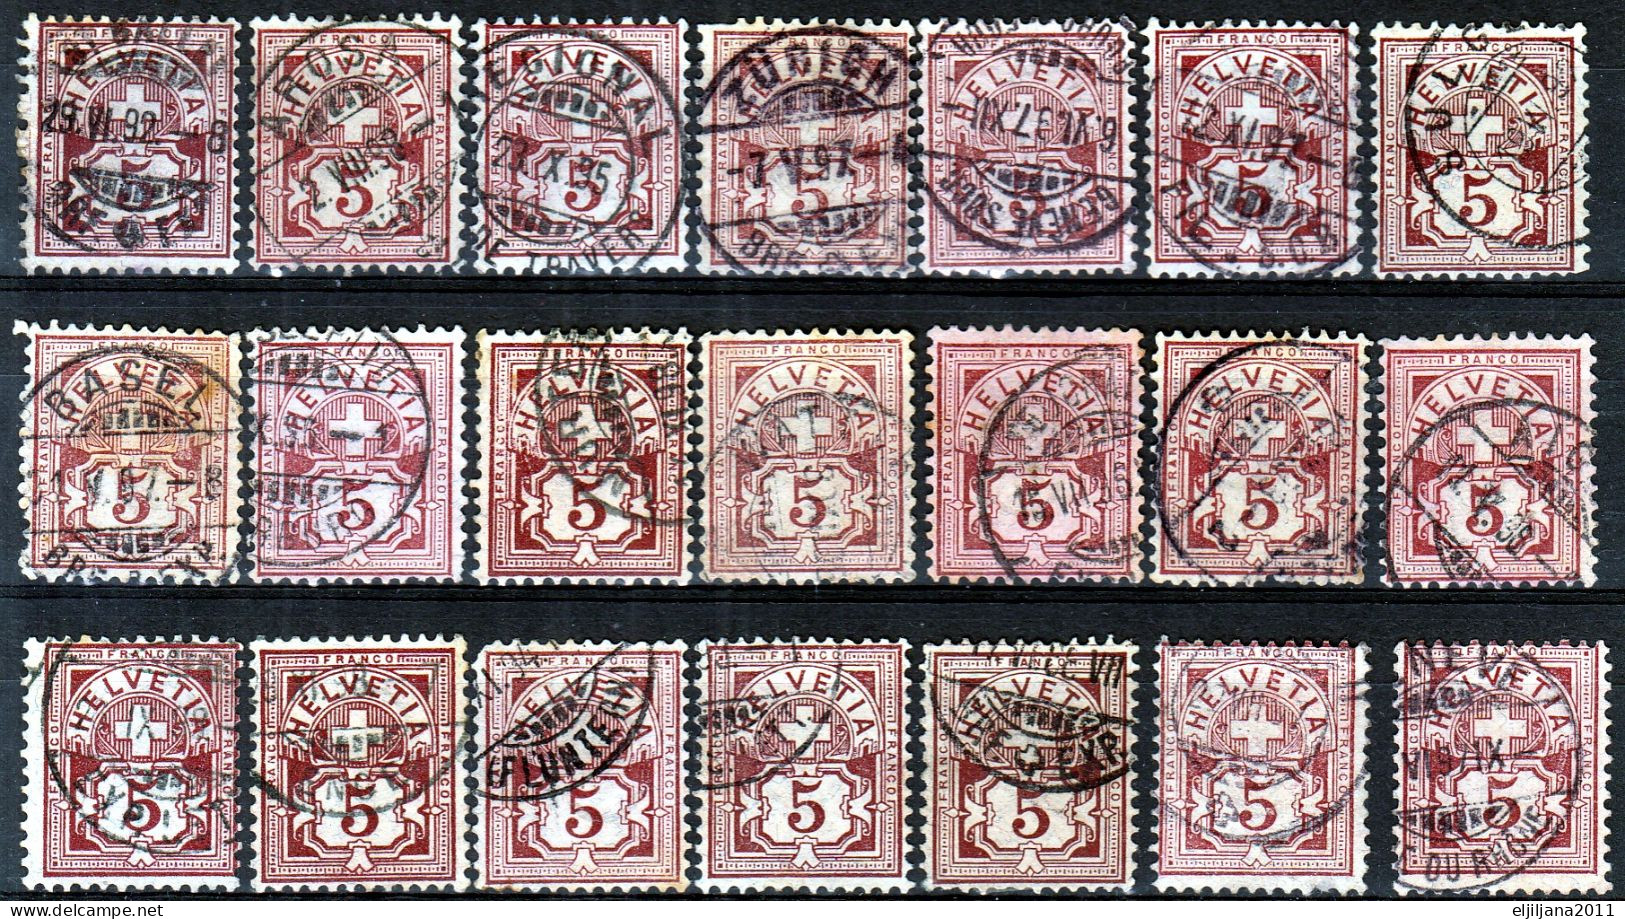 Action !! SALE !! 50 % OFF !! ⁕ Switzerland 1882 ⁕ Cross Over Value 5 (c.) ⁕ 42v Used ( Shades - Unchecked) - Oblitérés